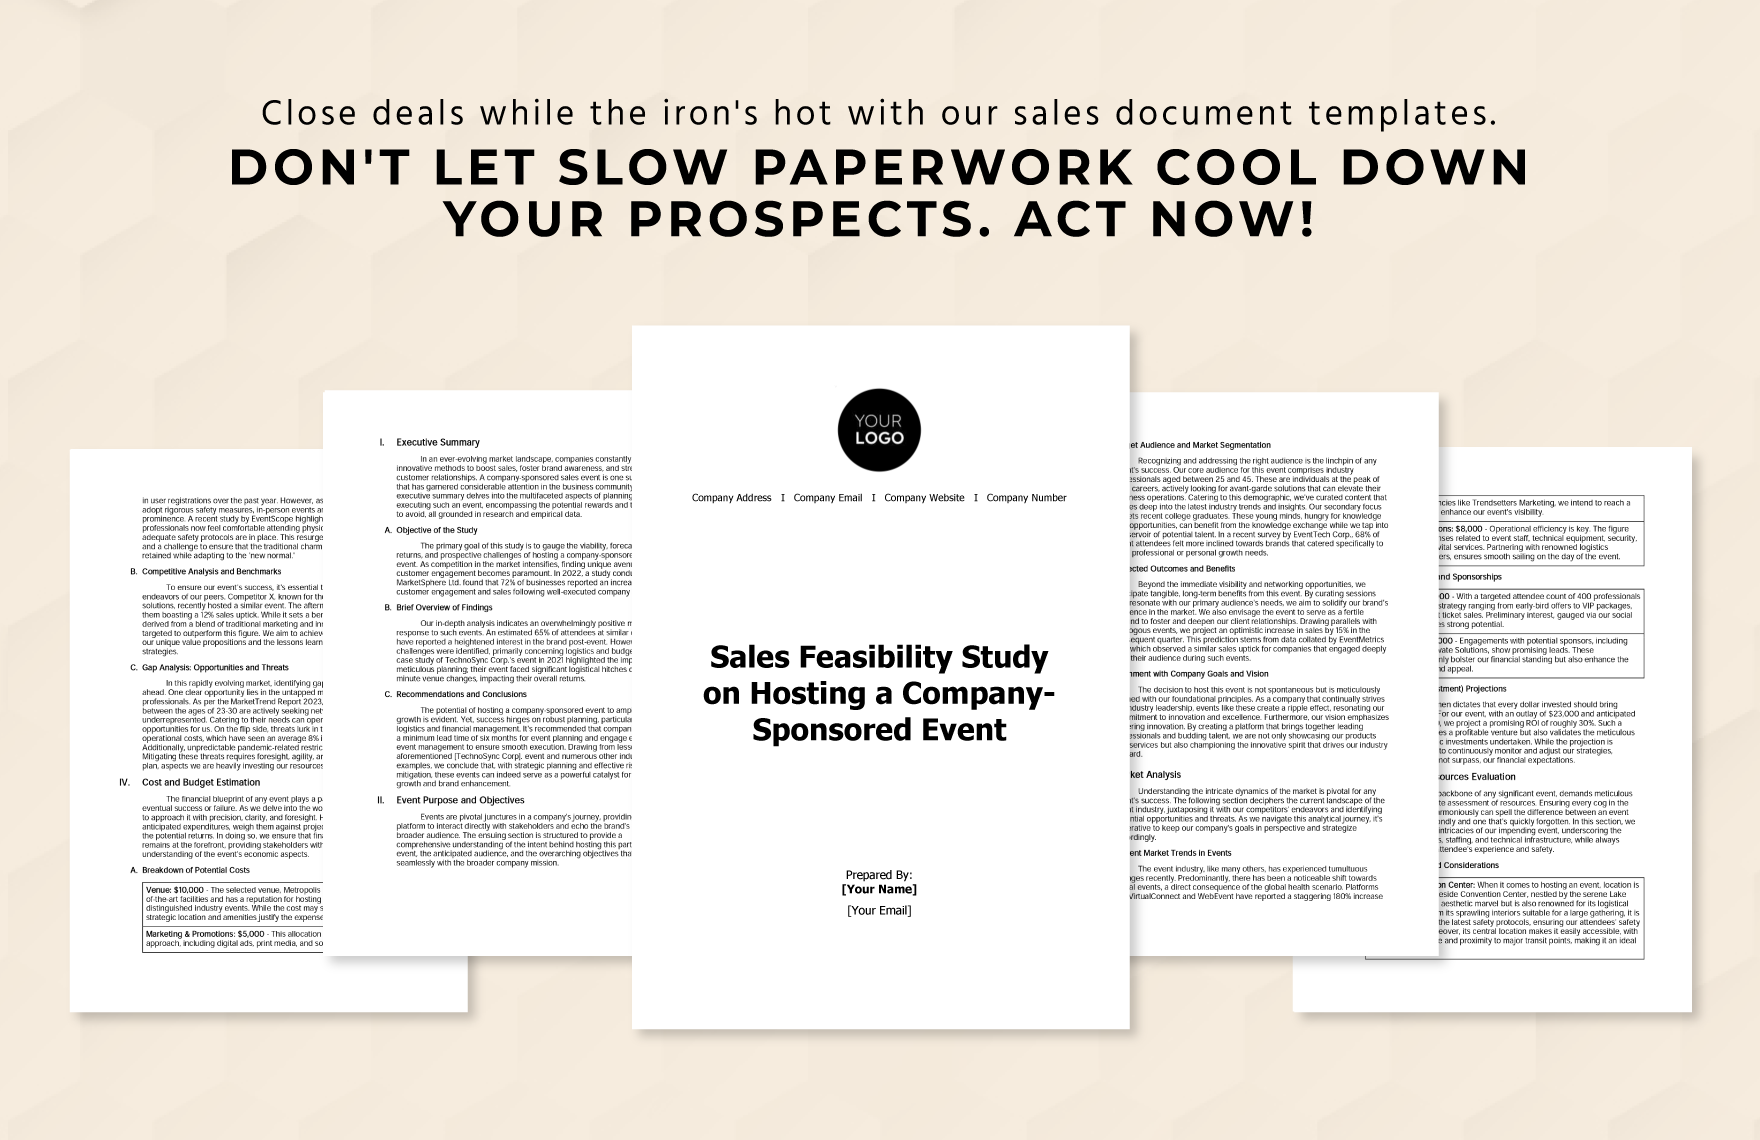 Sales Feasibility Study on Hosting a Company-Sponsored Event Template